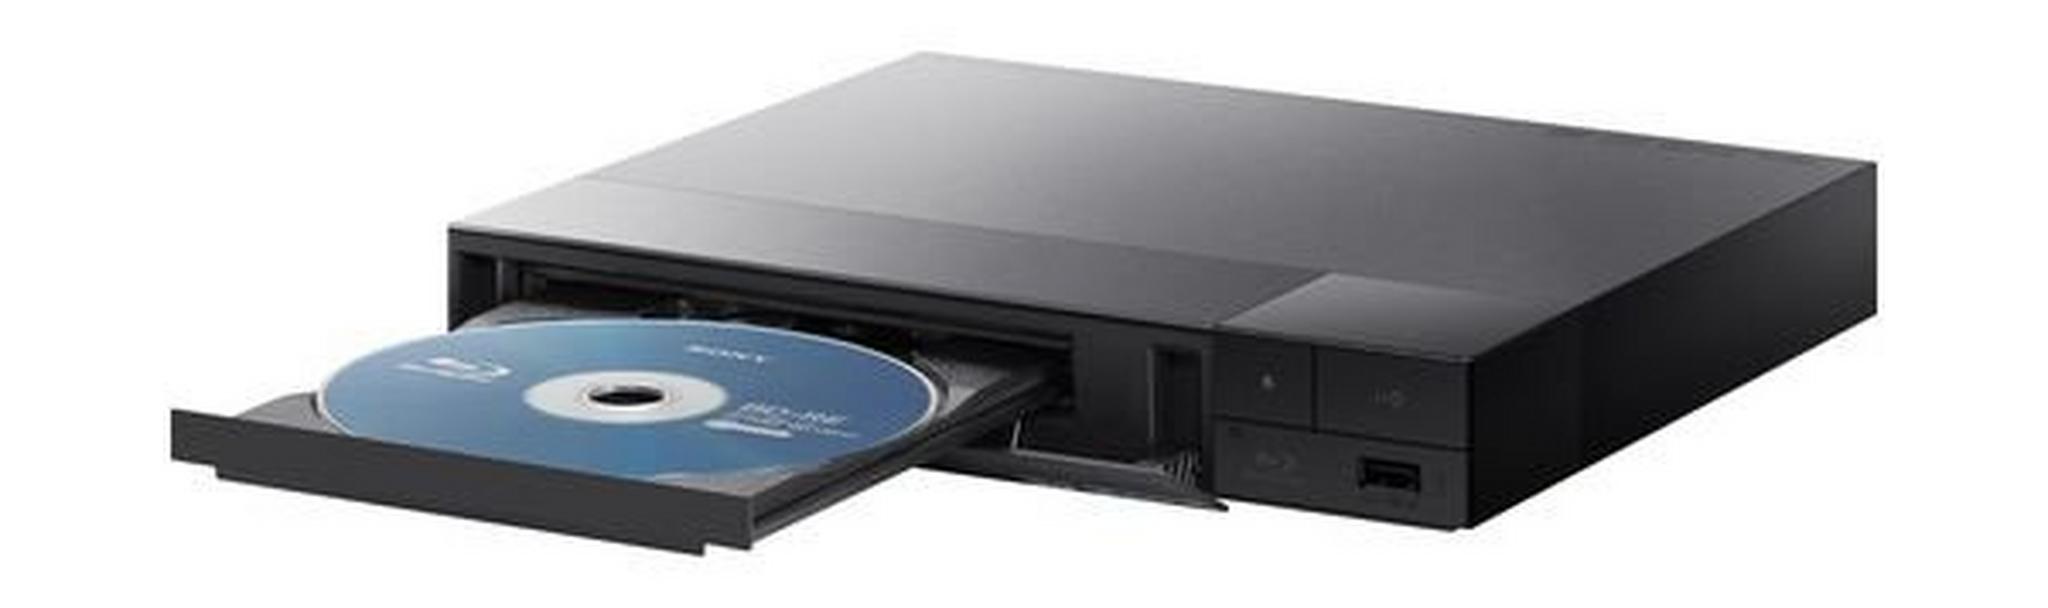 Sony Wired Streaming Blu-ray/DVD Player (BDP-S1500) - Black